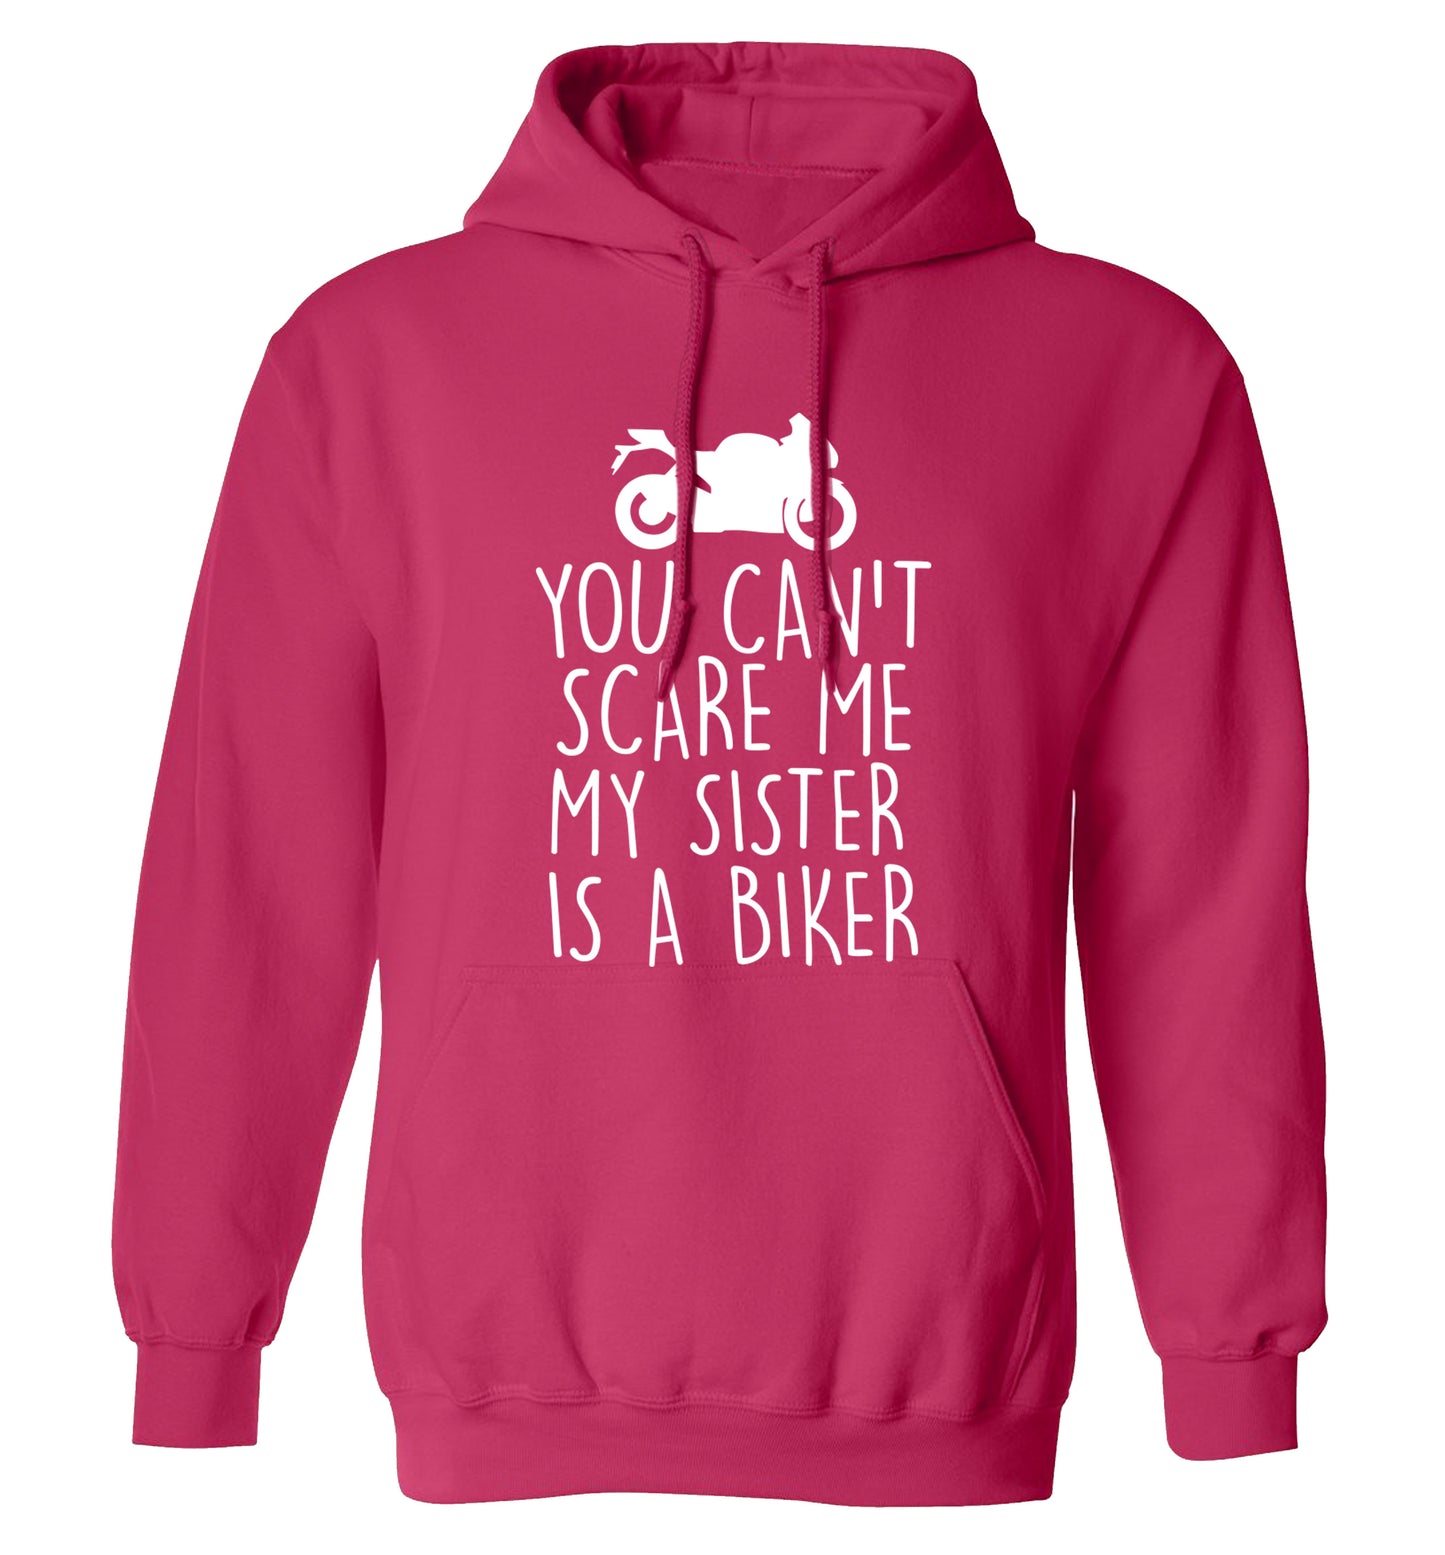 You can't scare me my sister is a biker adults unisex pink hoodie 2XL